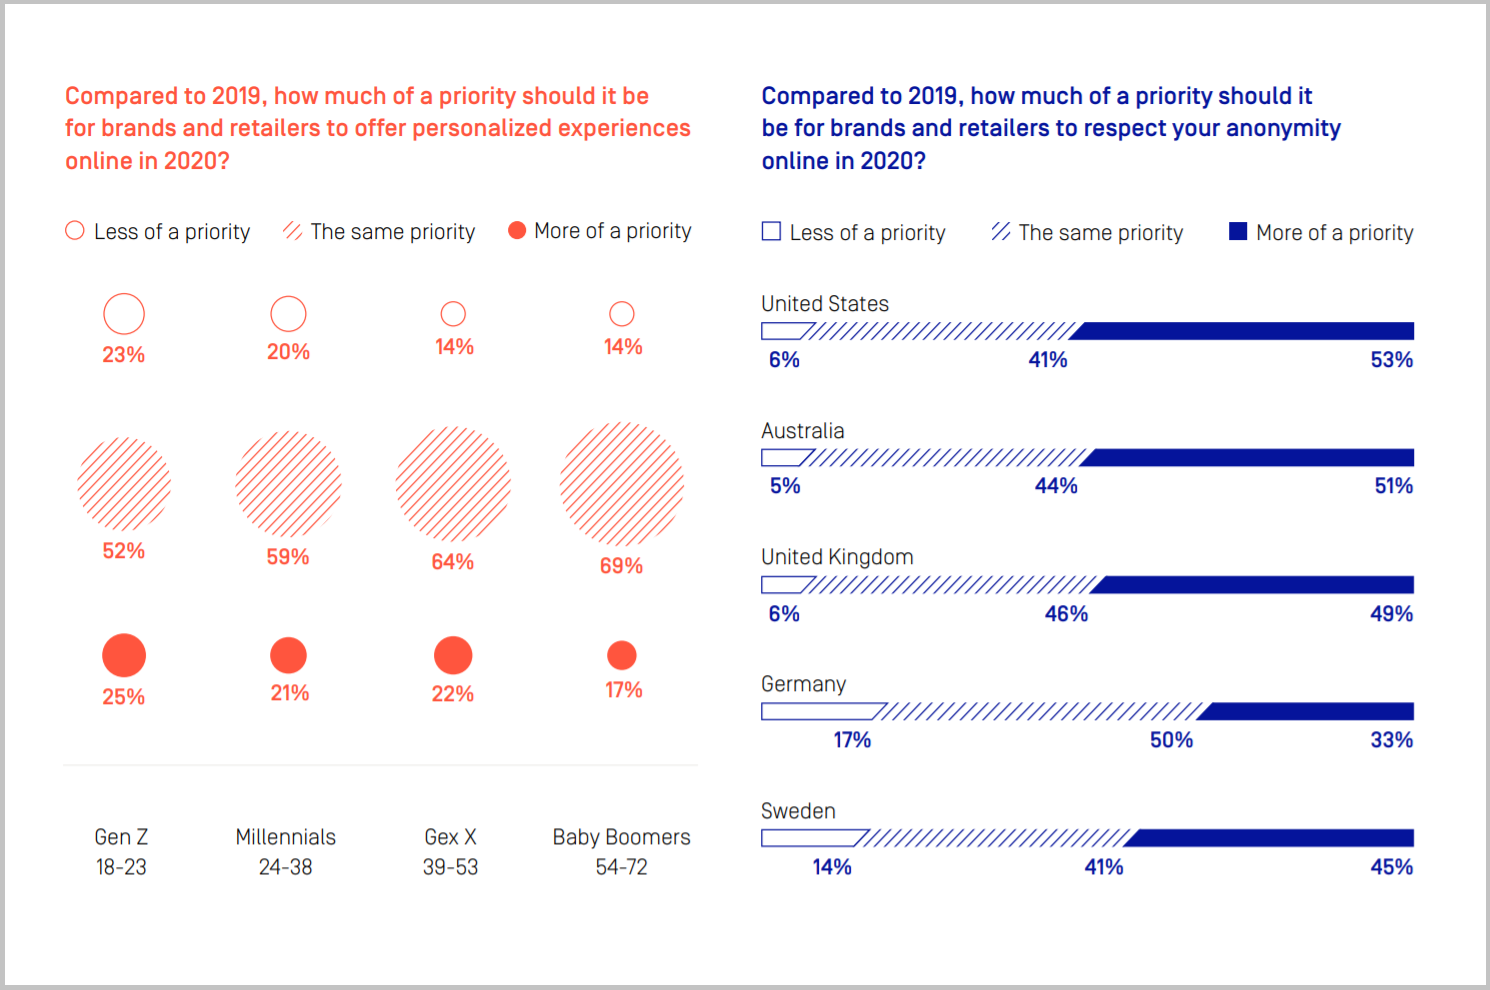 Compared to 2019, how much of a priority should it be for brands and retailers to respect your anonymity online in 2020 - chart